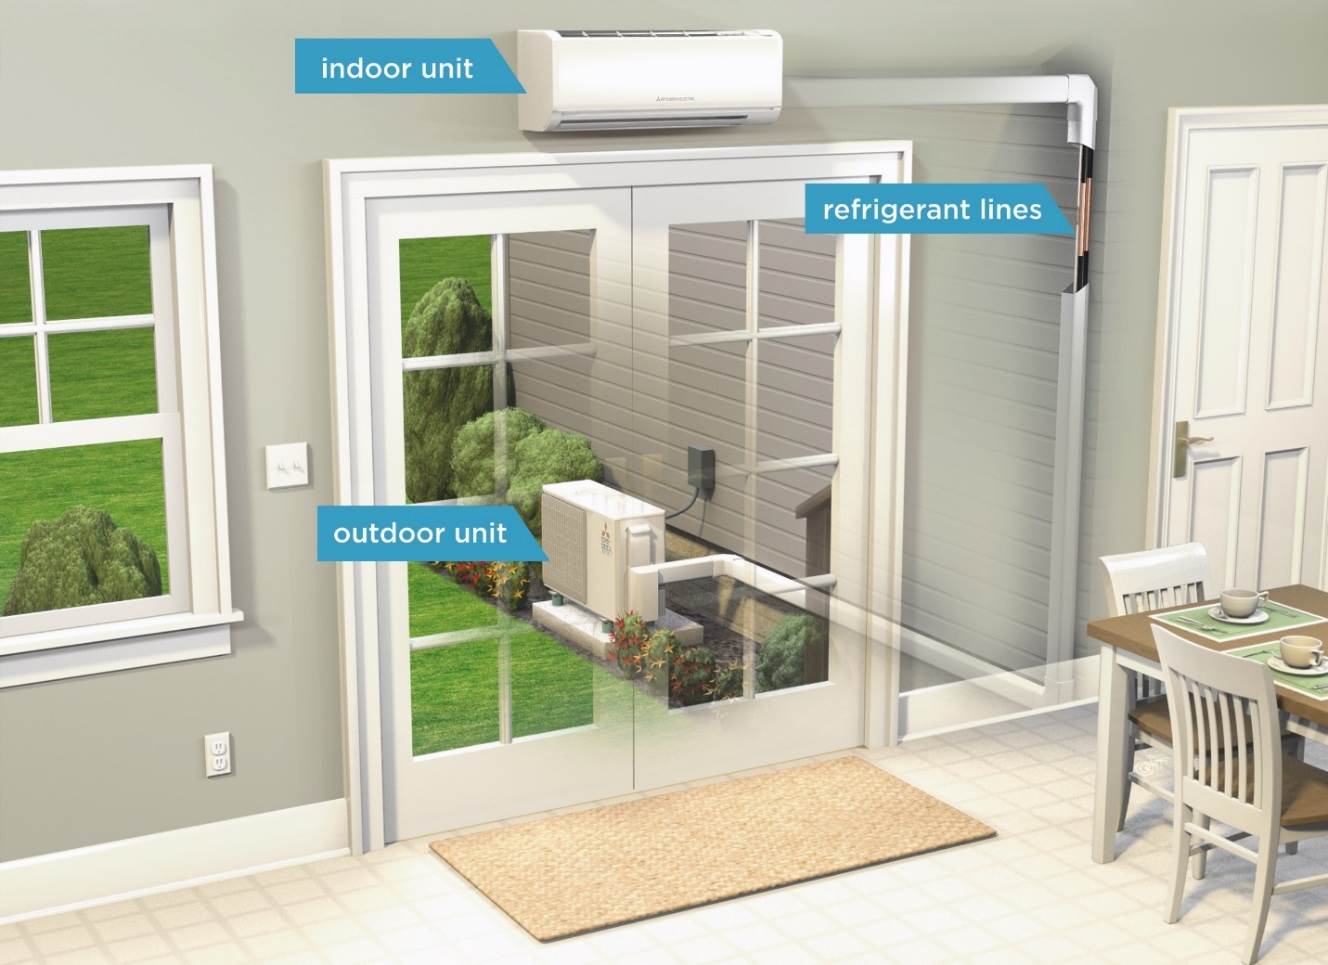 What is a ductless heat pump